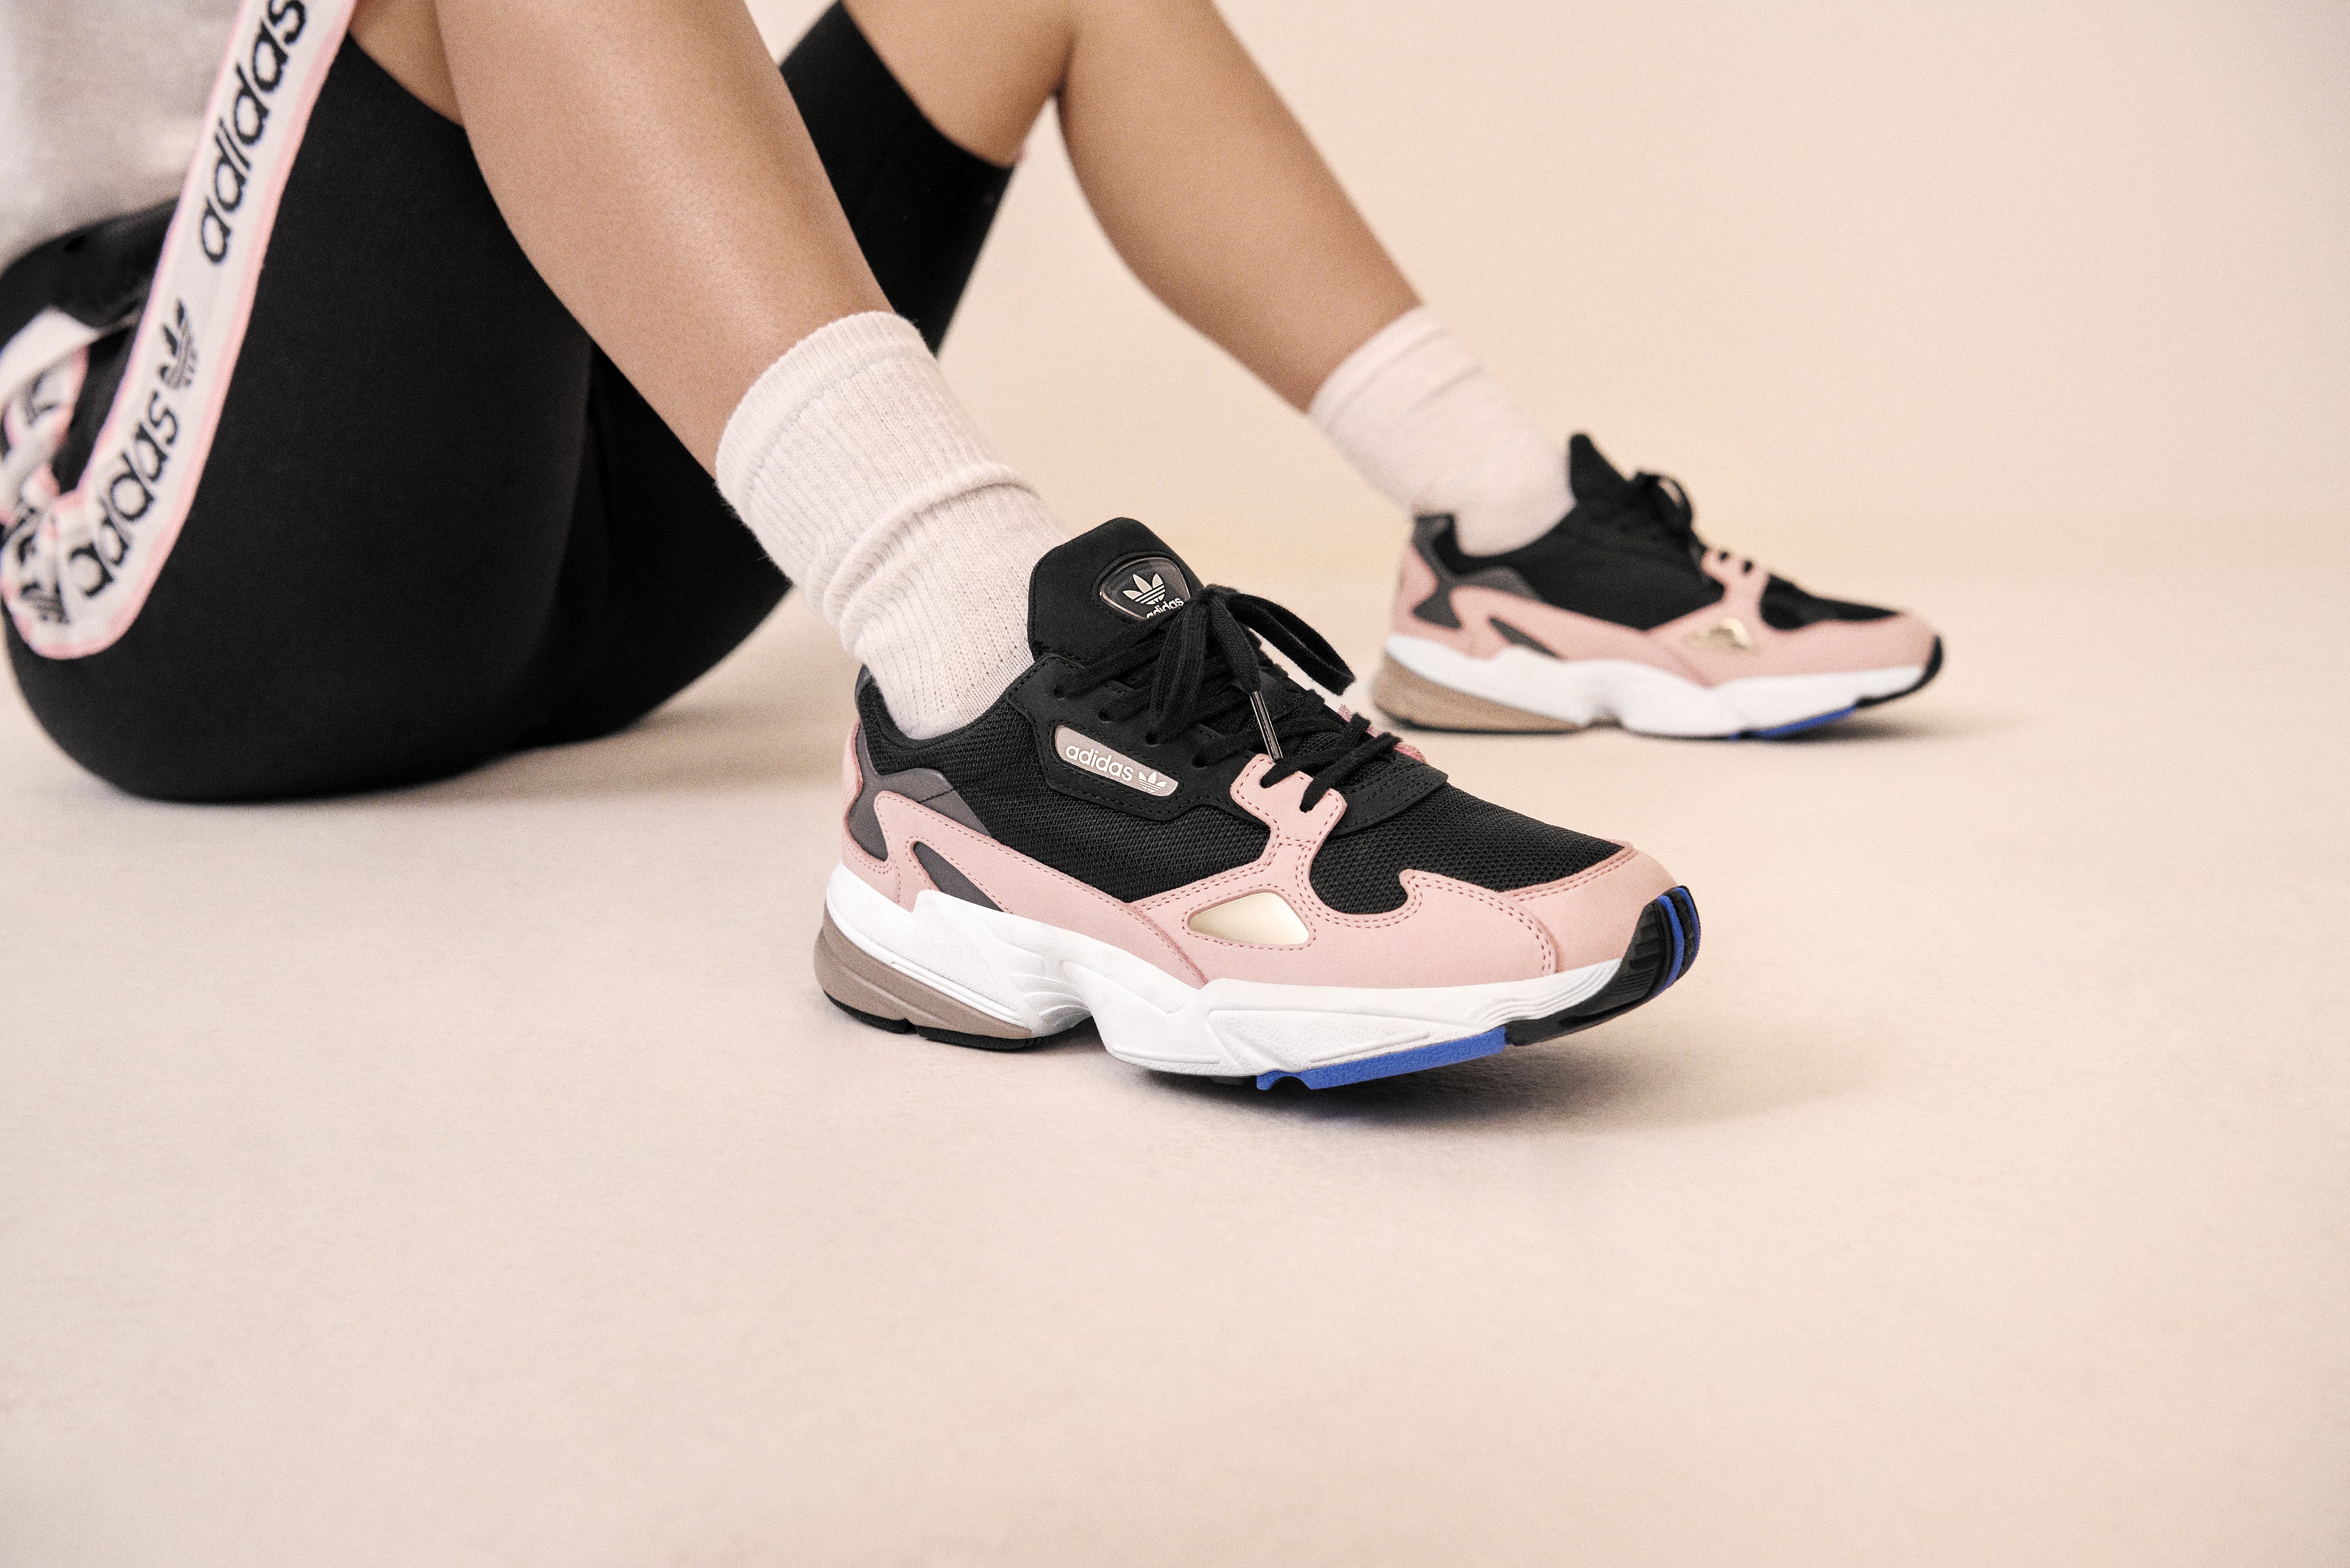 Adidas Falcon Sneakers Blue Kylie Jenner Shoes